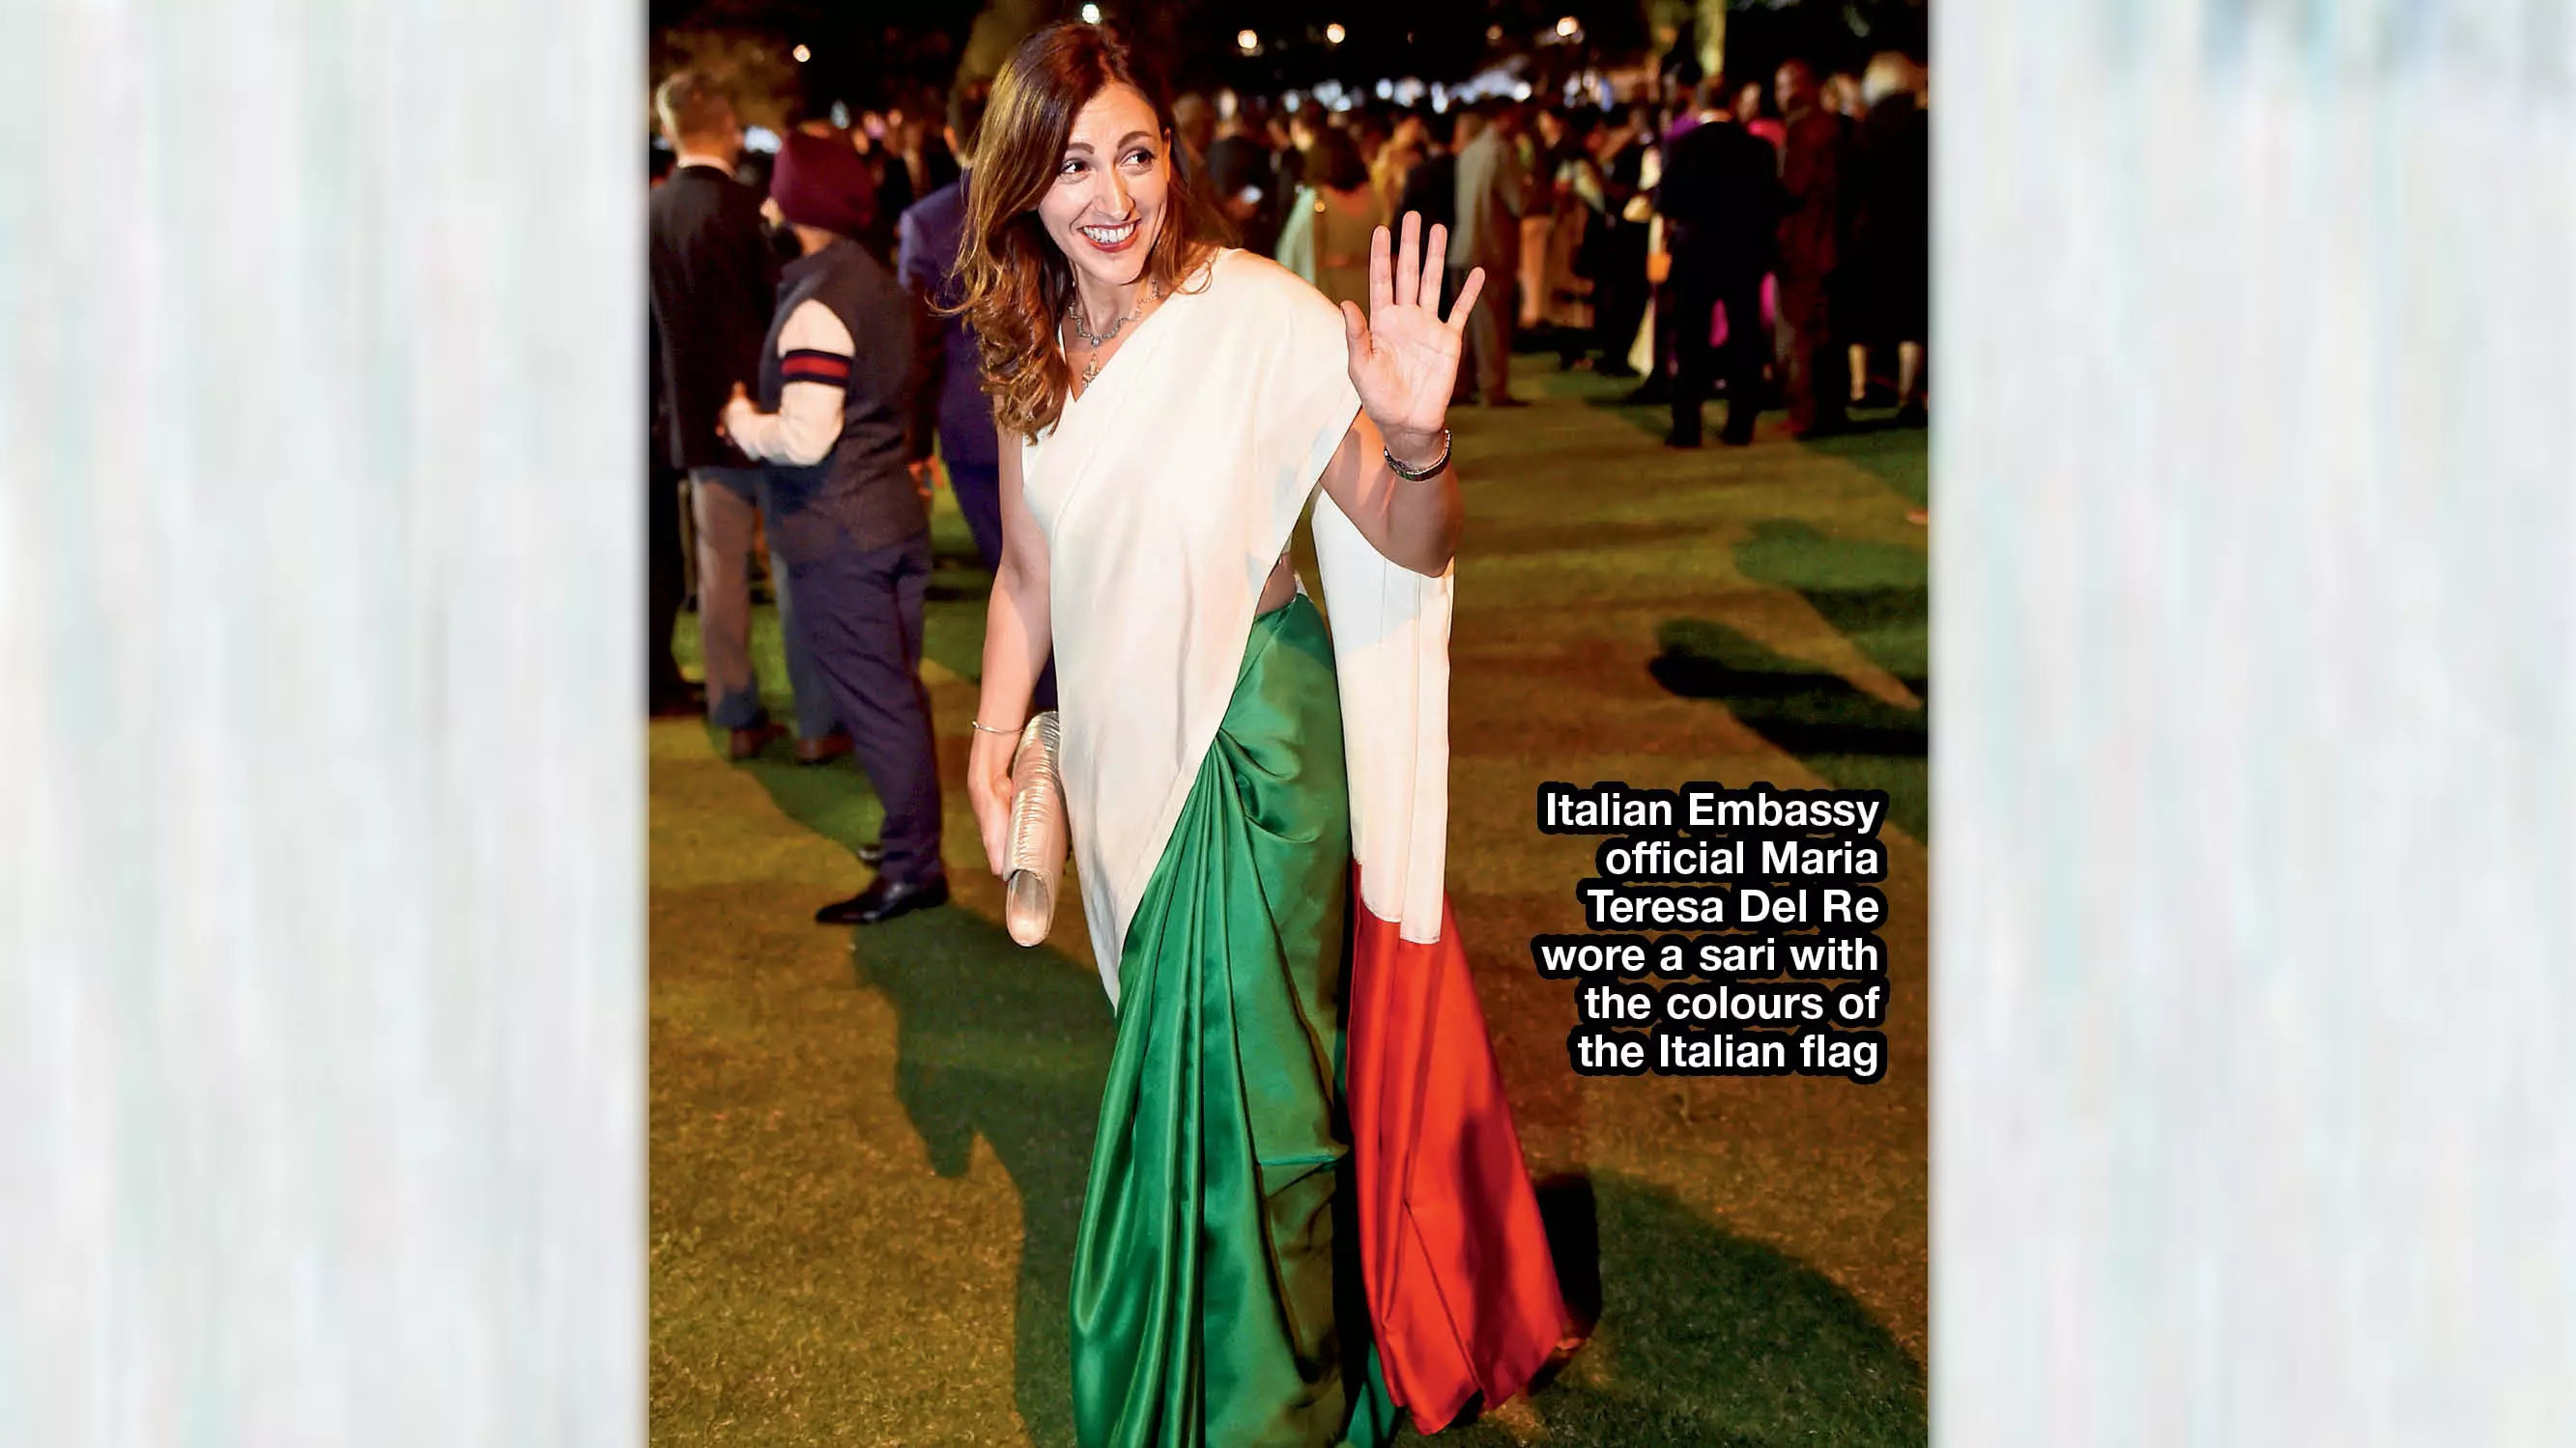 Italian Embassy official Maria Teresa Del Re wore a sari with the colours of the Italian flag